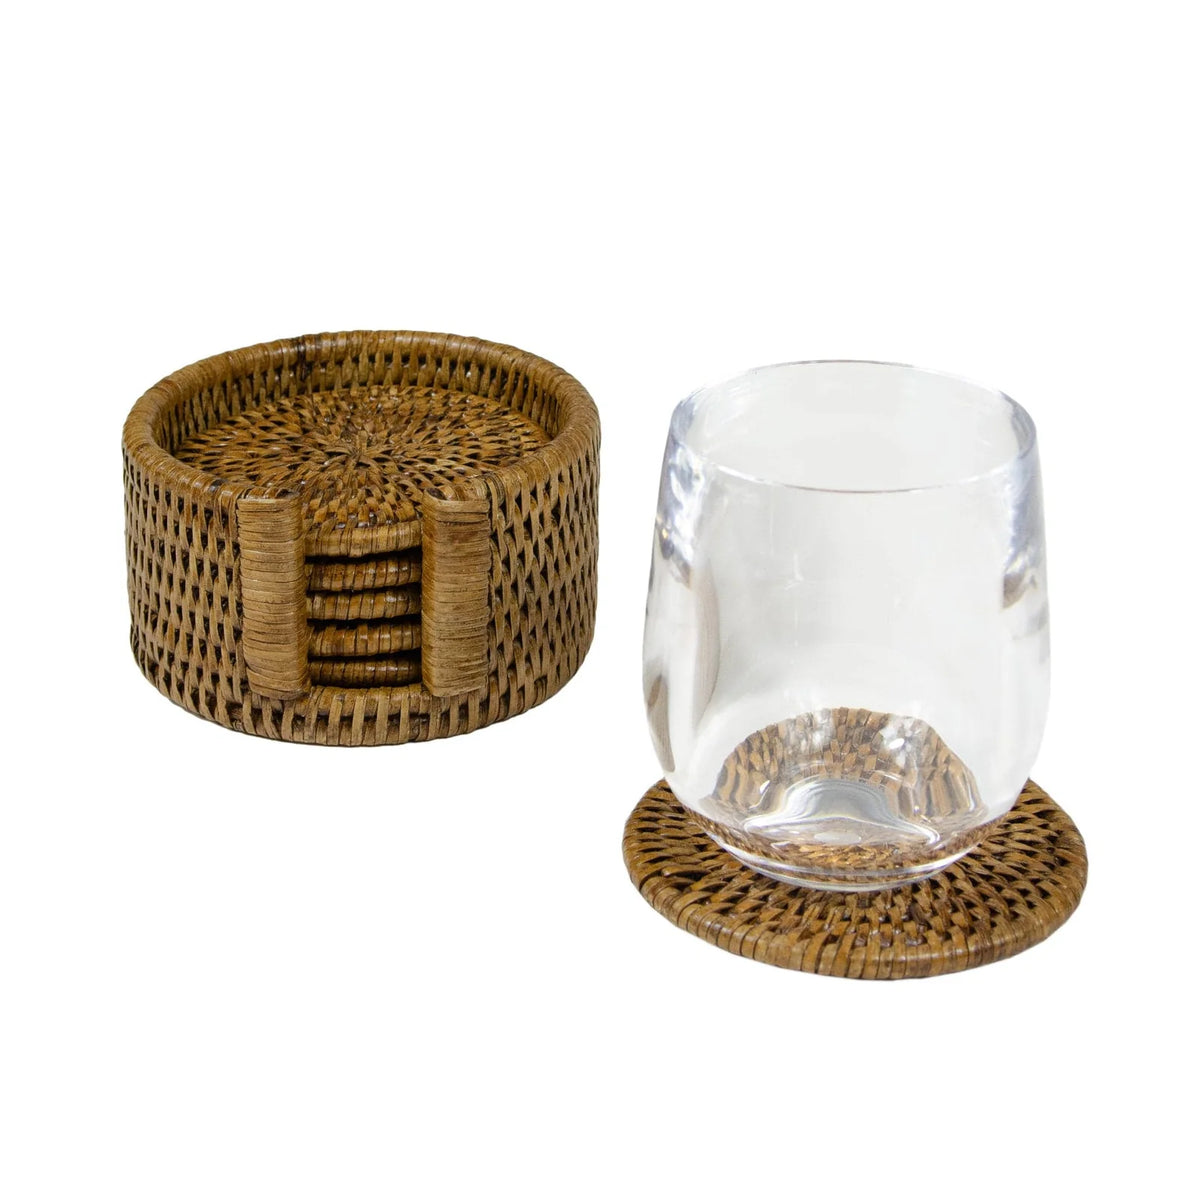 Rattan Round Coaster and Holder Set in Natural